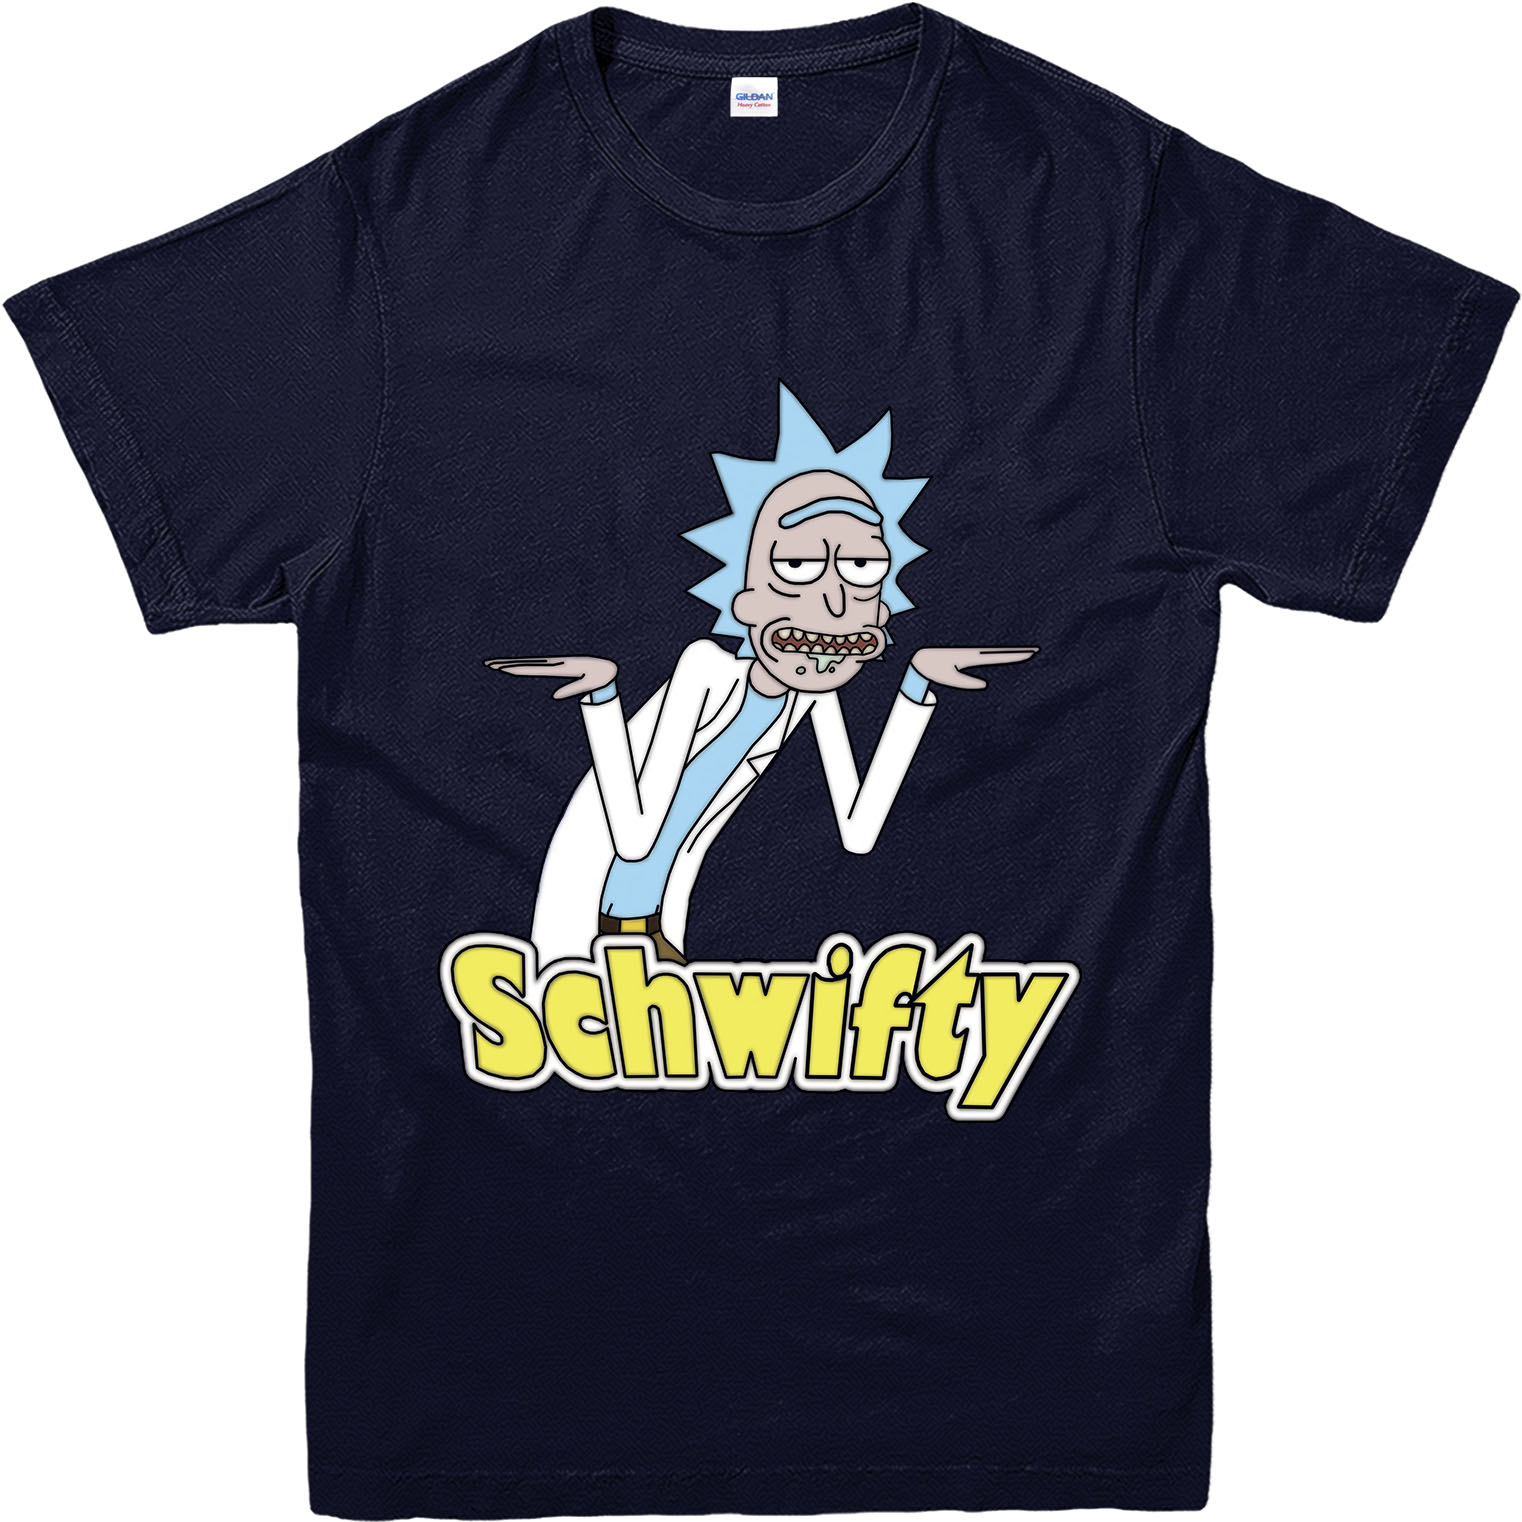 Rick and Morty T-Shirt, Get Schwifty T-Shirt, Inspired Top (RMGSF) | eBay